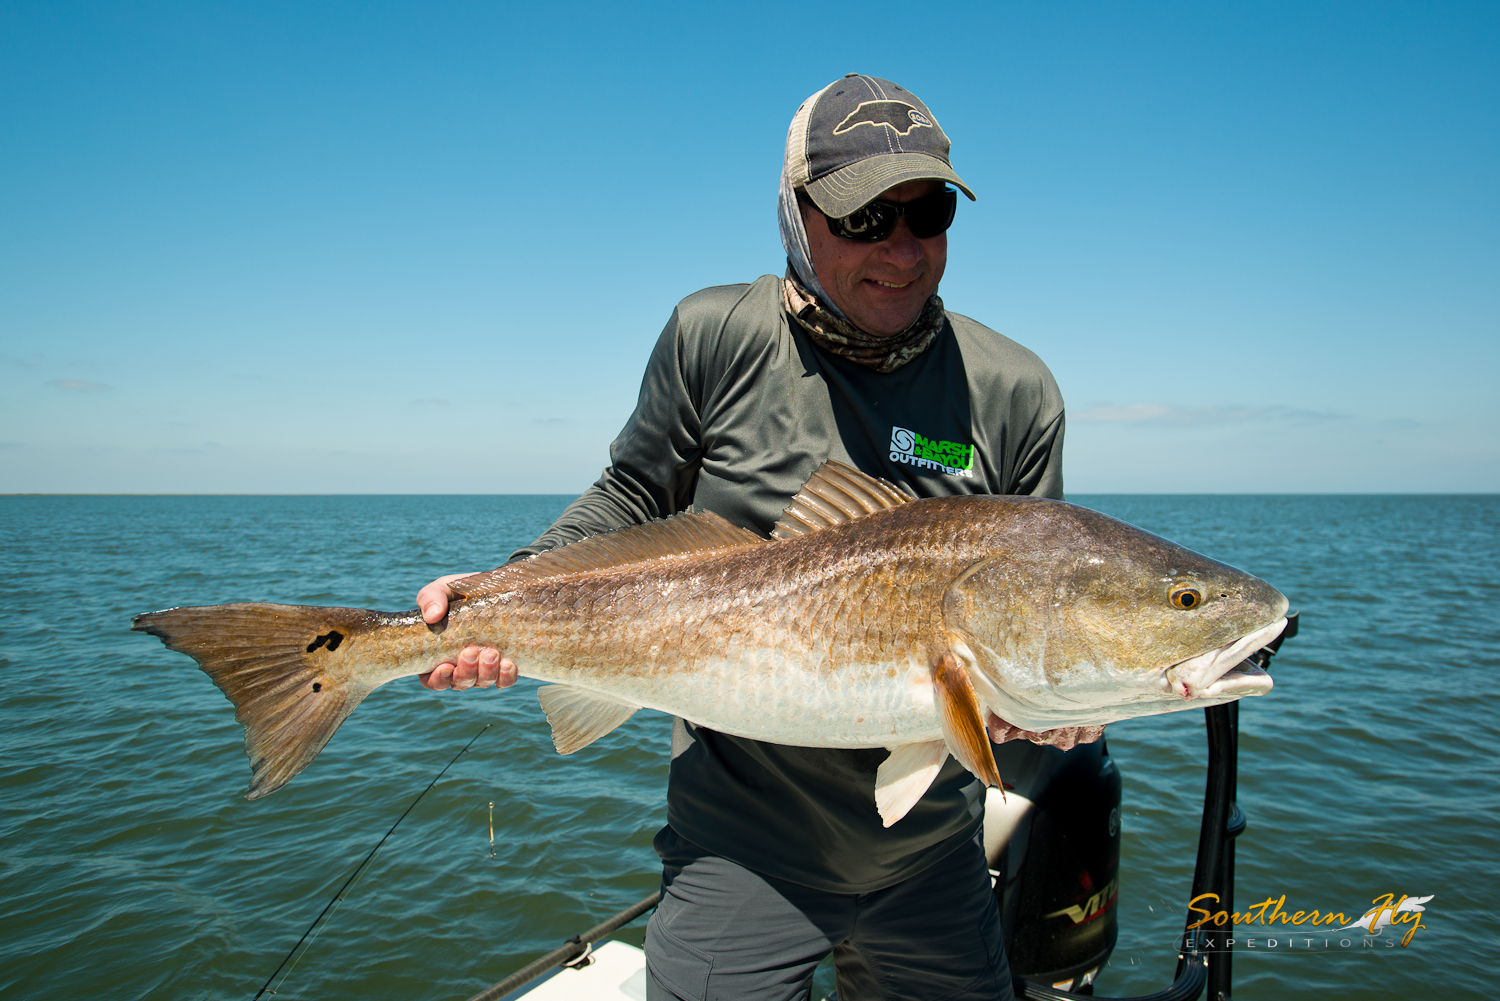 best fly fishing guide for red fish in louisiana Southern Fly Expeditions